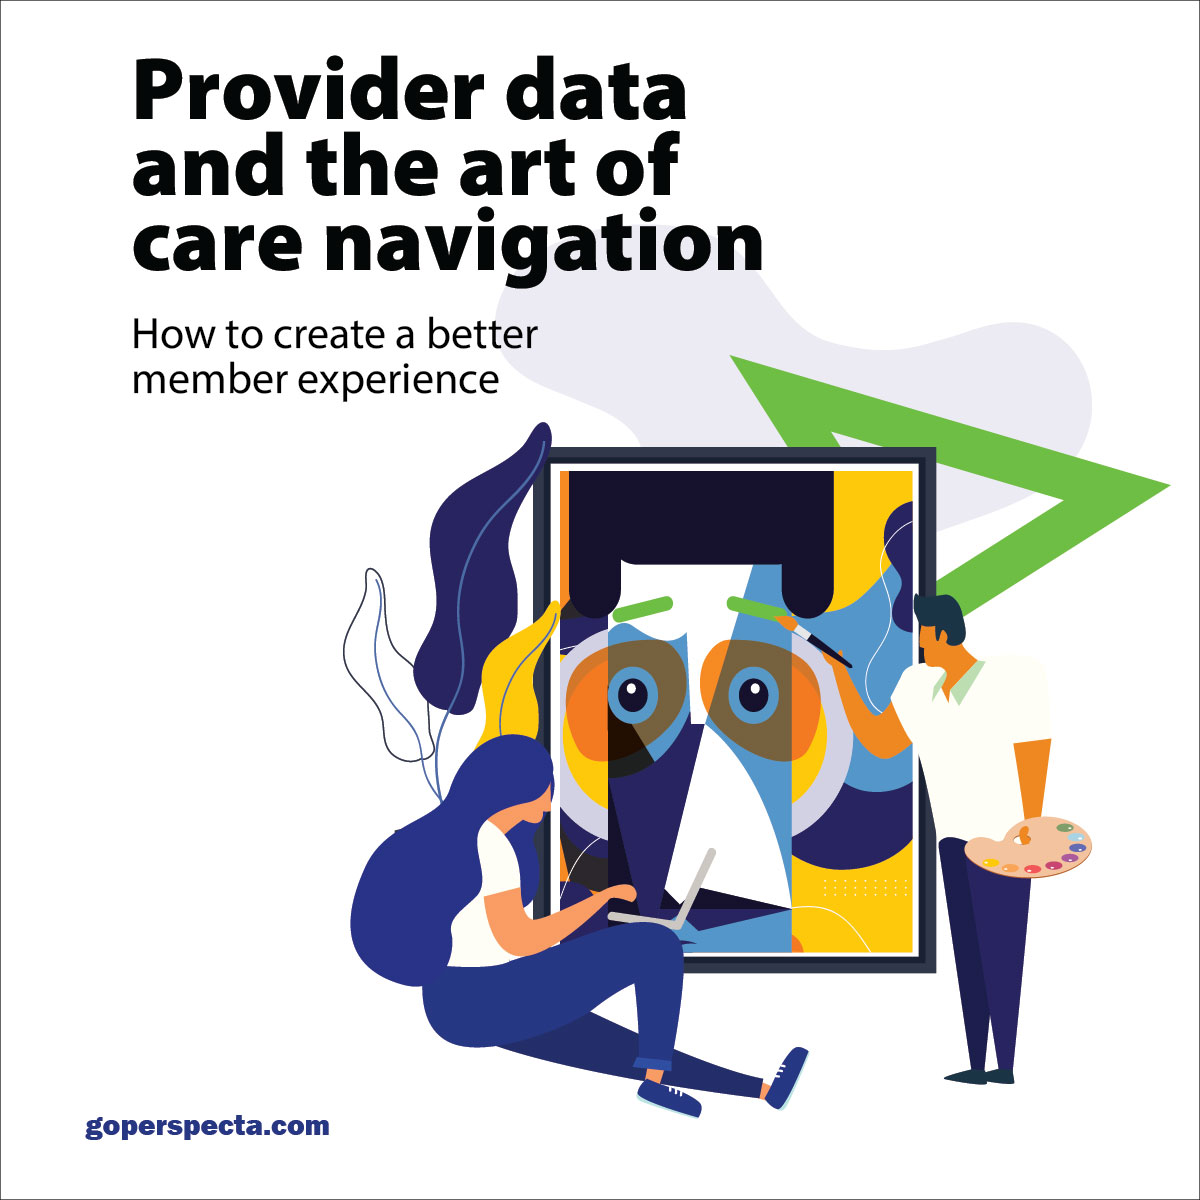 eBook- PDM and care navigation for better member experience